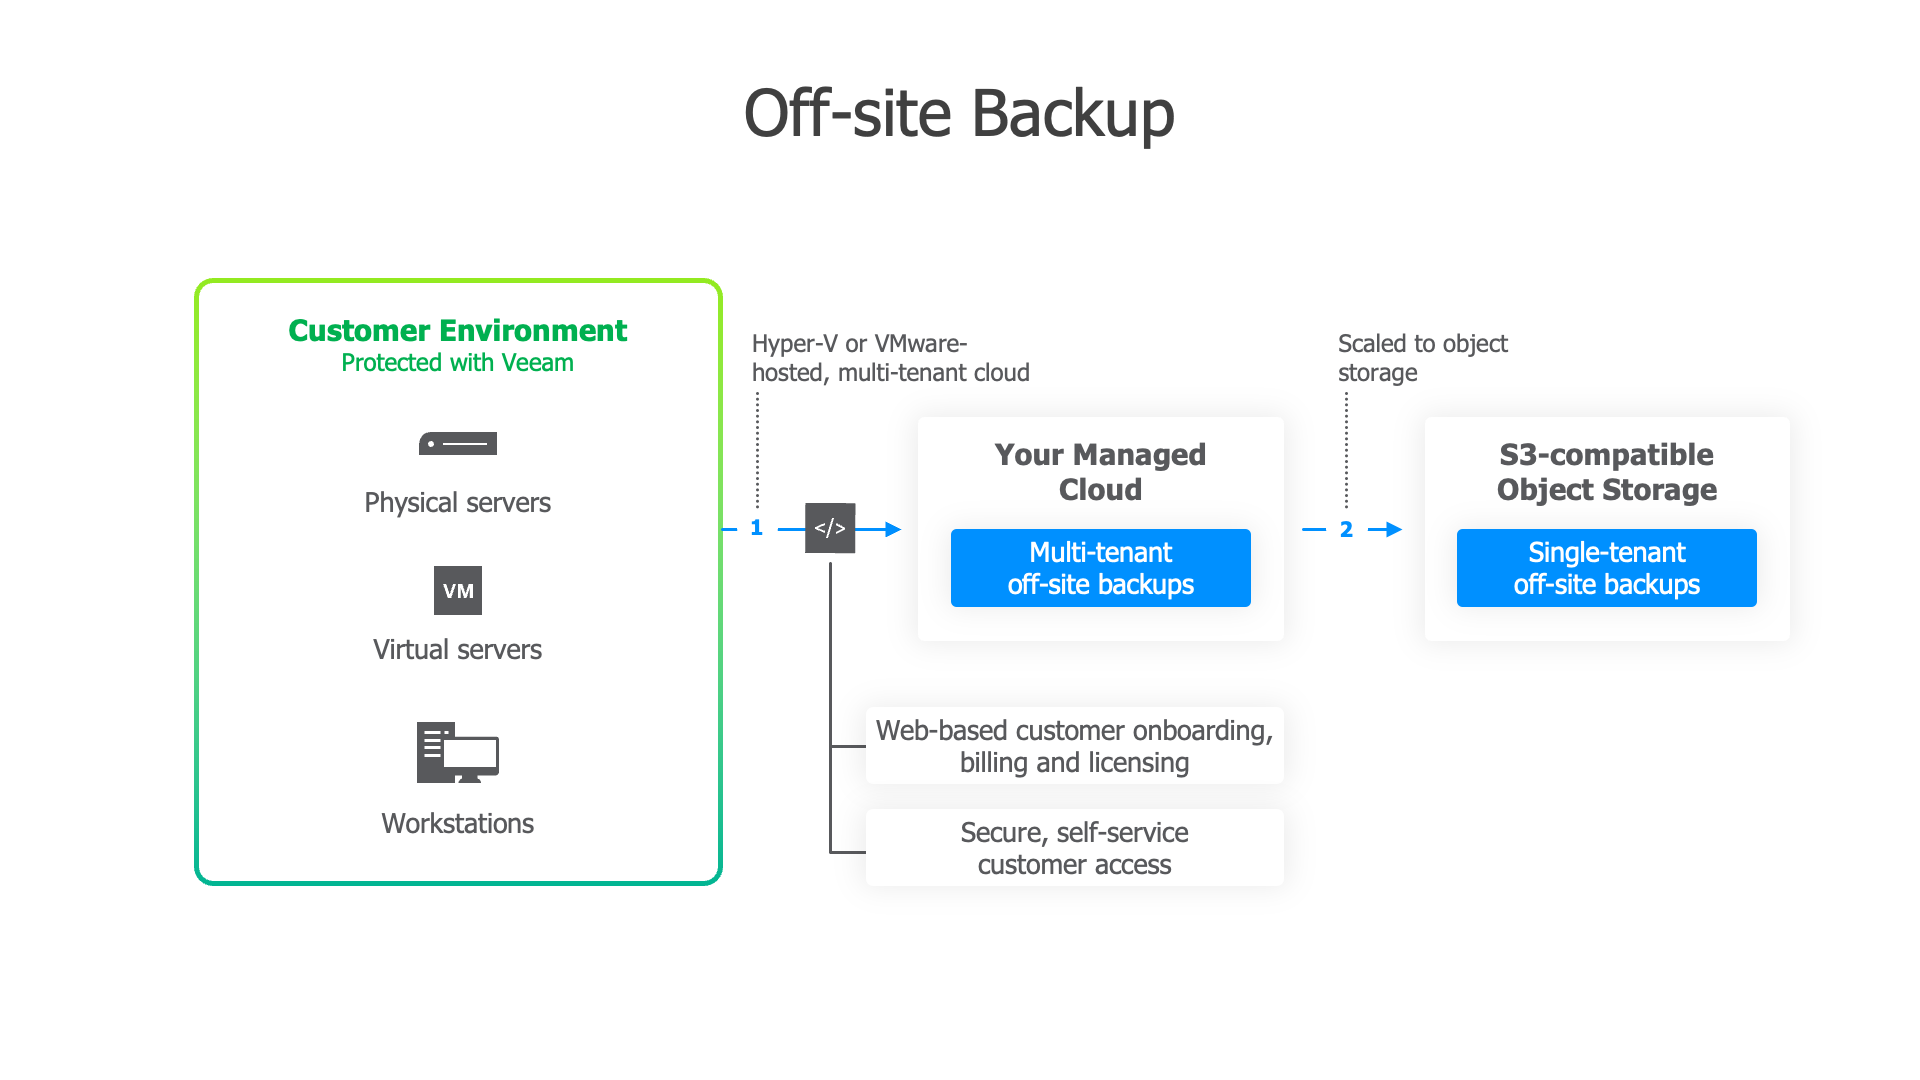 This diagram shows the tenant (customer) side protected by Veeam Backup & Replication servicing the primary or "on-site" backups for virtual or physical workloads. The backup jobs are then pointed to the service provider's cloud using Veeam Cloud Connect which can then be scaled to object storage. 